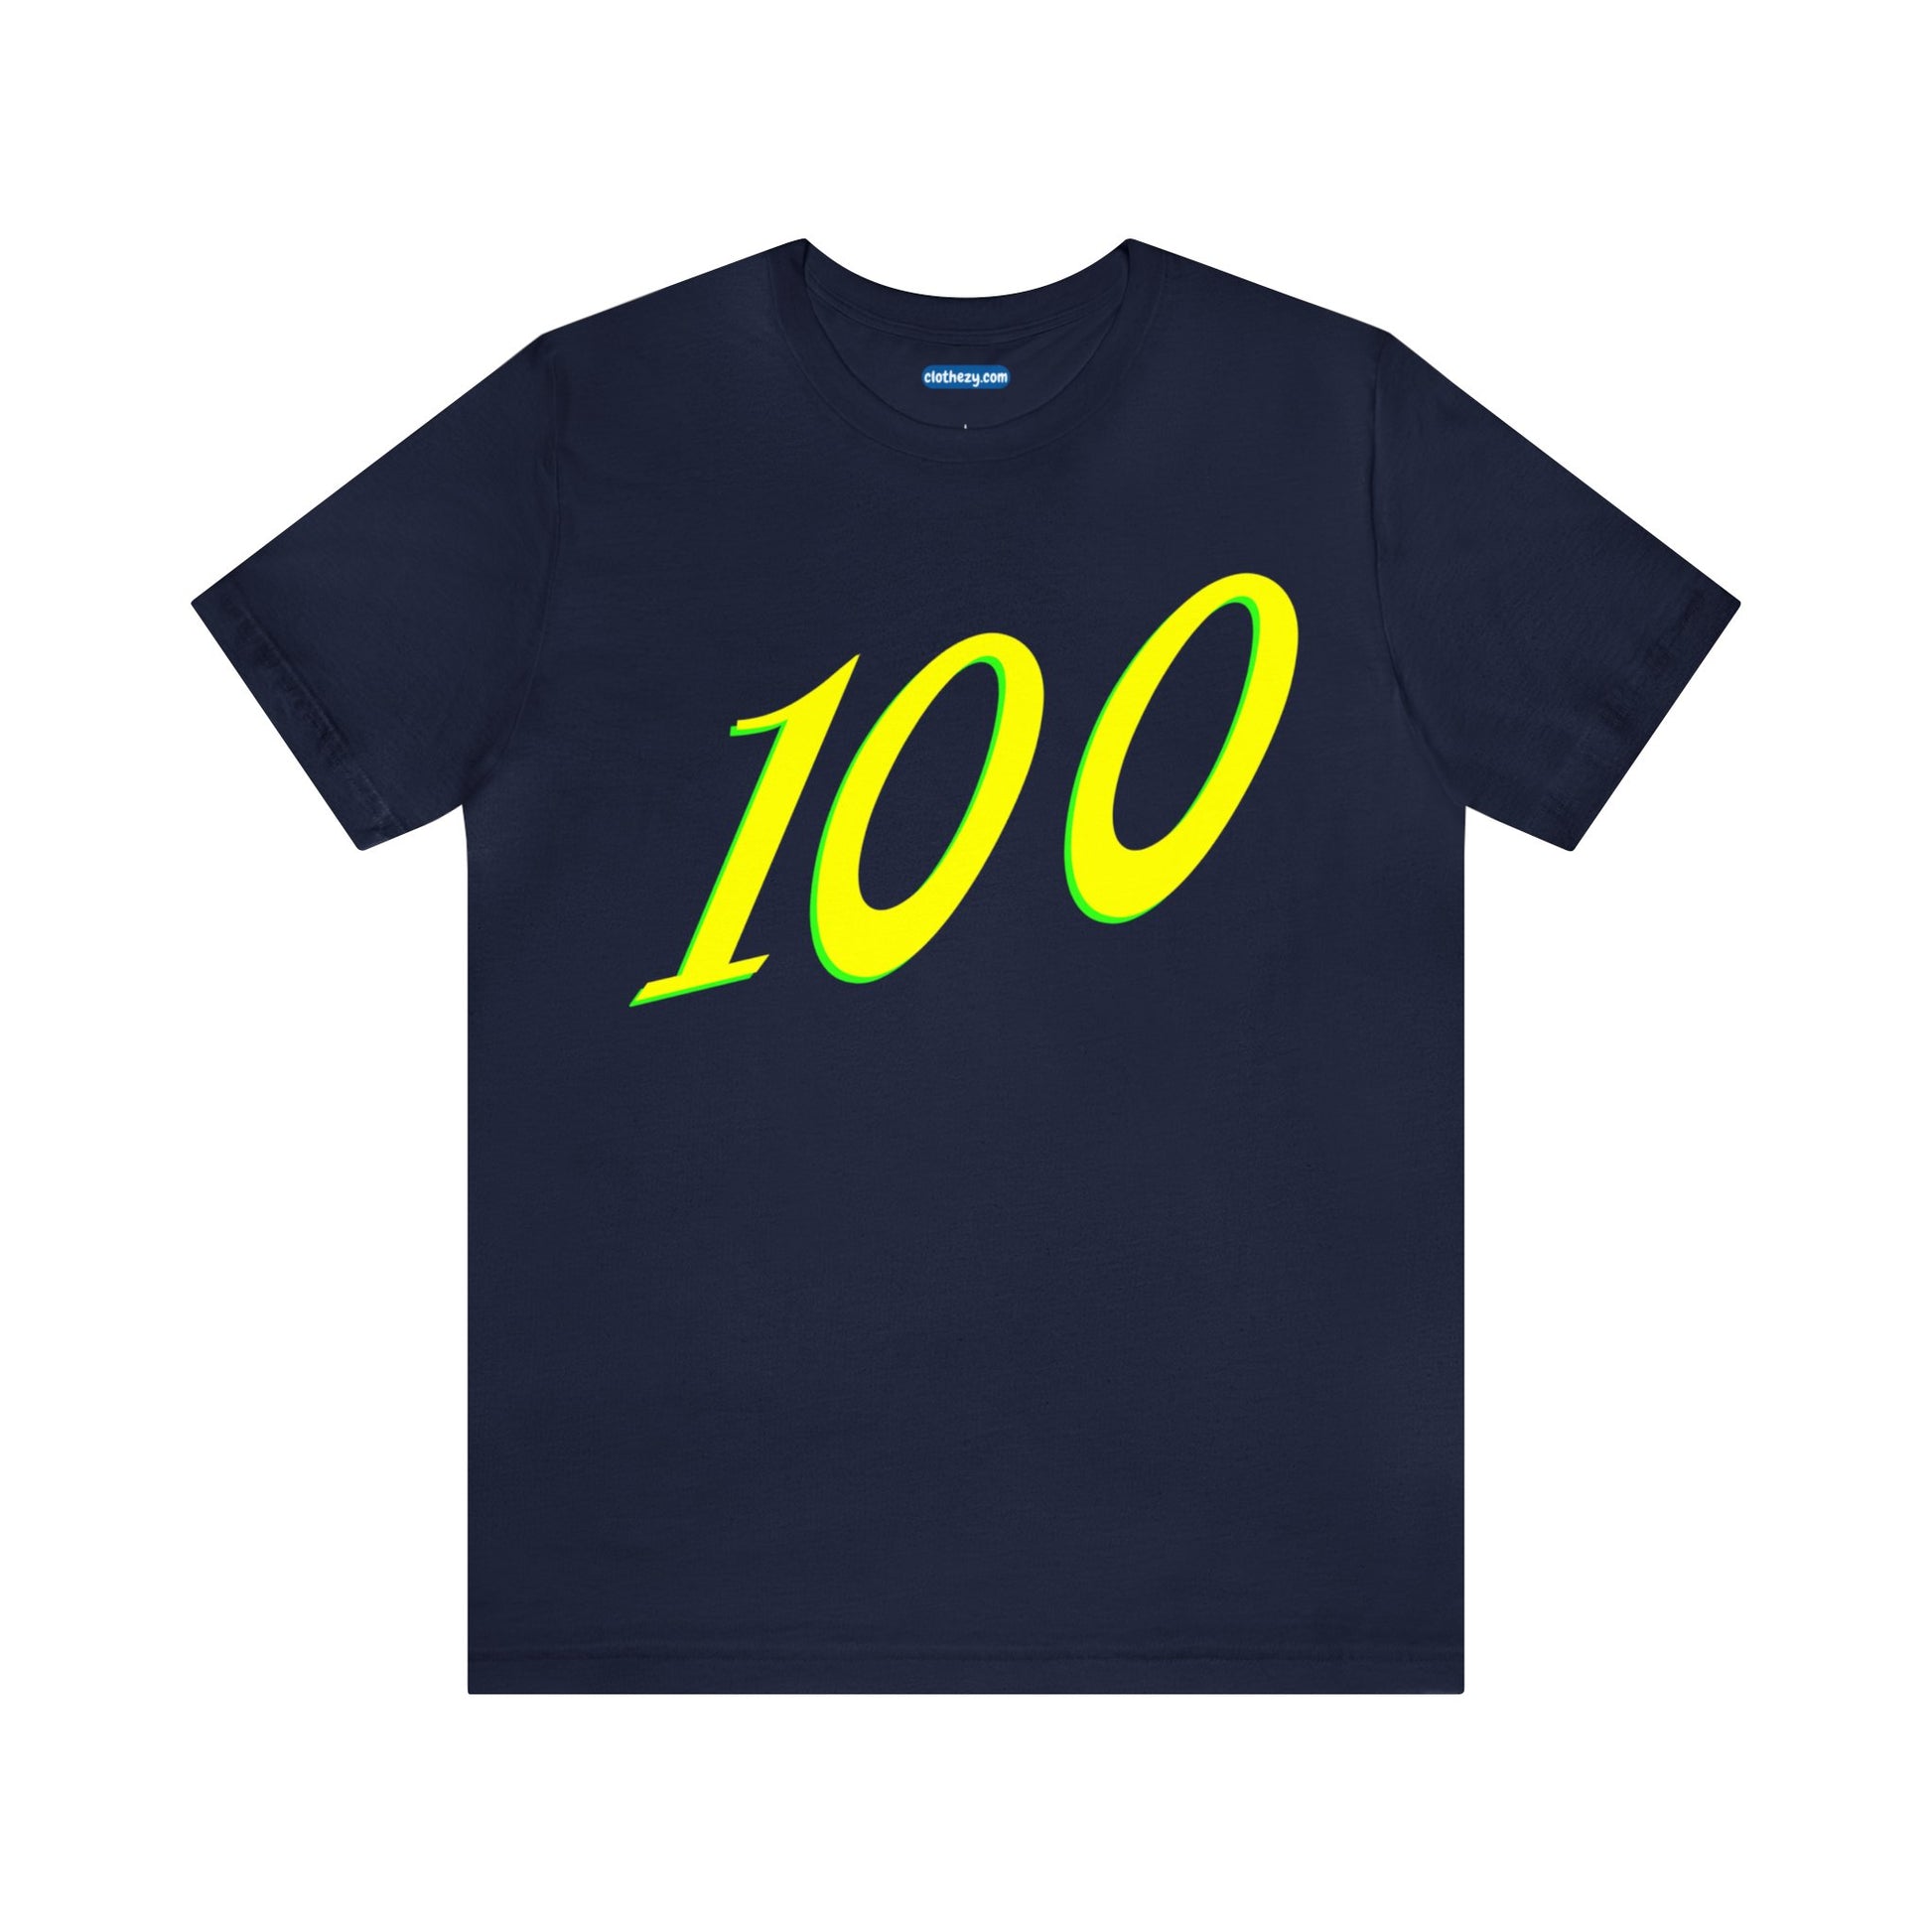 Number 100 Design - Soft Cotton Tee for birthdays and celebrations, Gift for friends and family, Multiple Options by clothezy.com in Navy Size Small - Buy Now